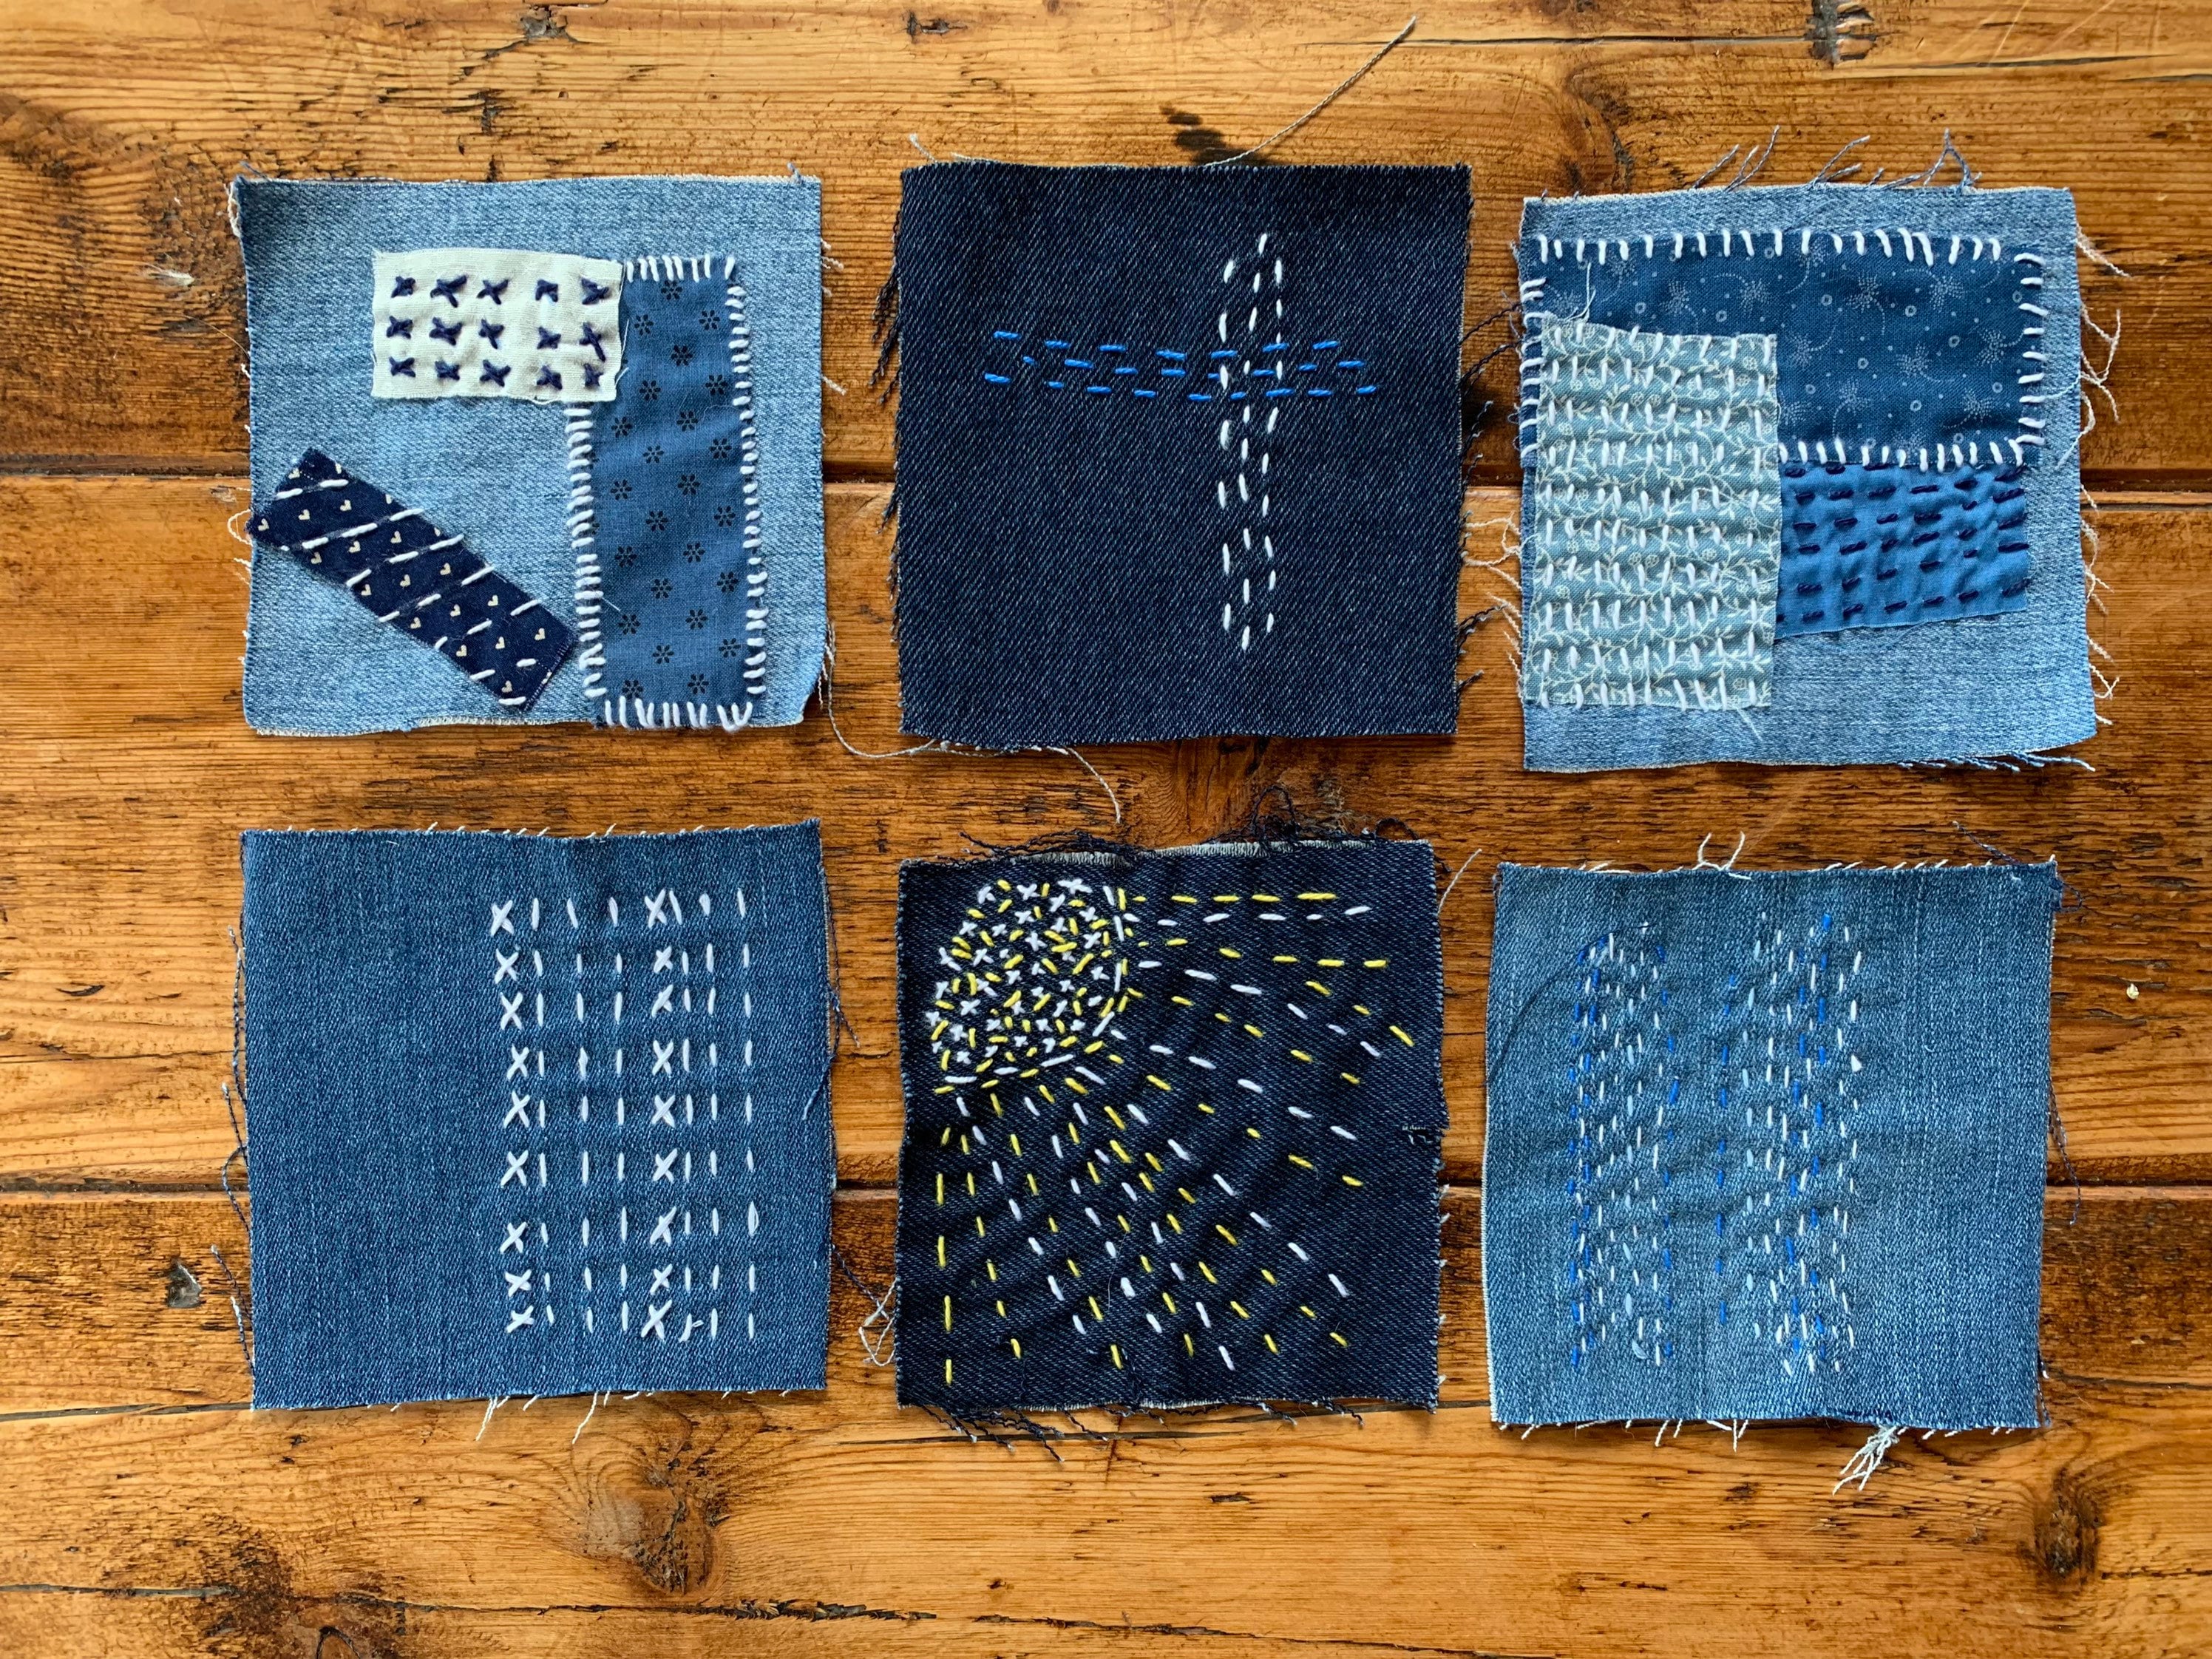 Sashiko Mending Kit a DIY Guide to Decorative, Functional Patching by Hand  